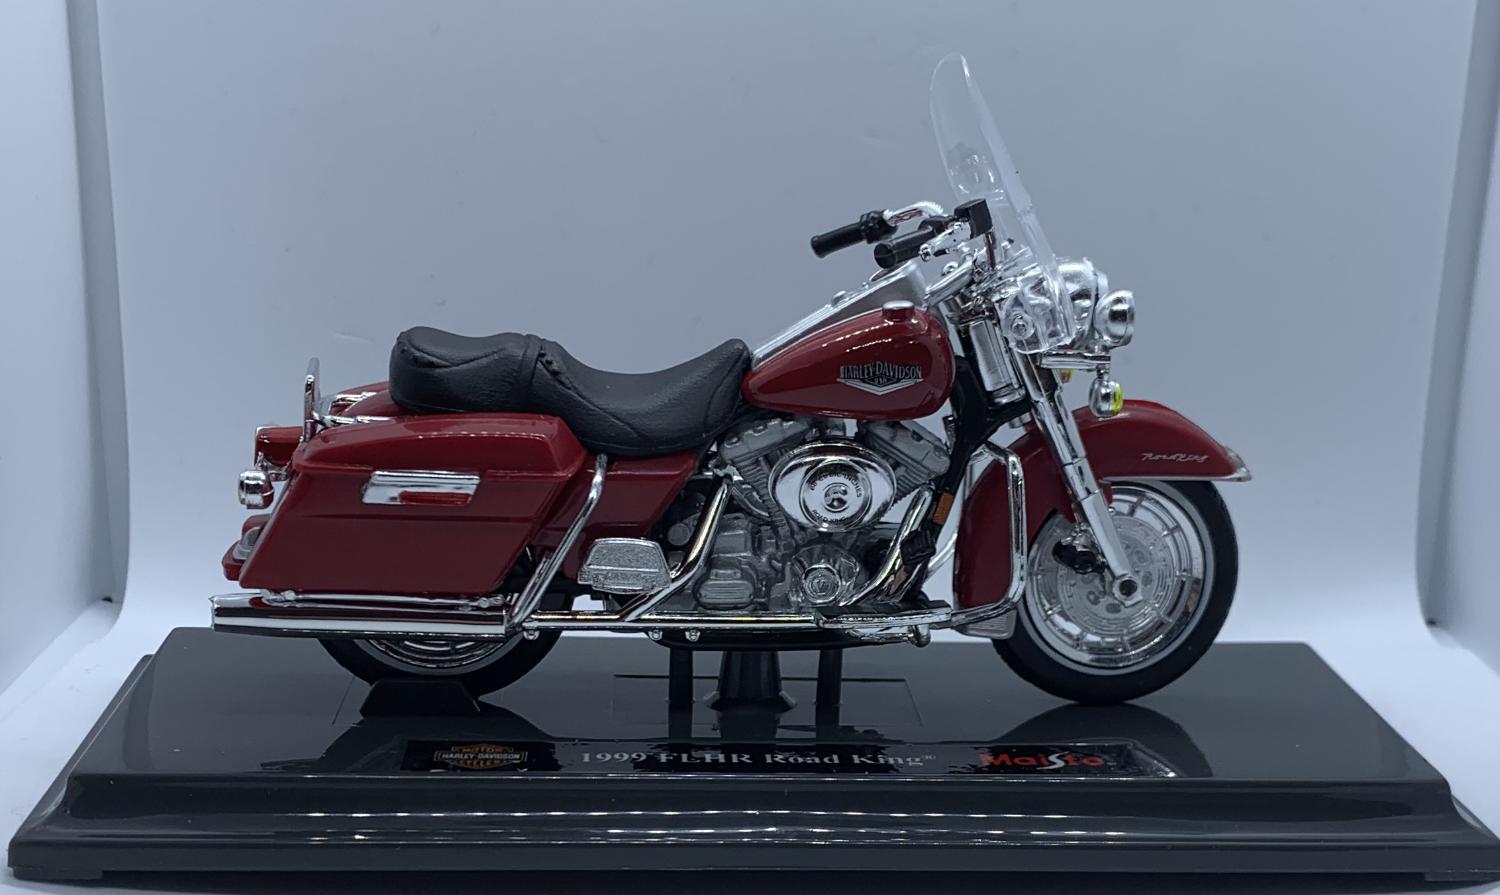 Harley Davidson 1999 FLHR Road King in Red 1:18 scale model from Maisto, 20111